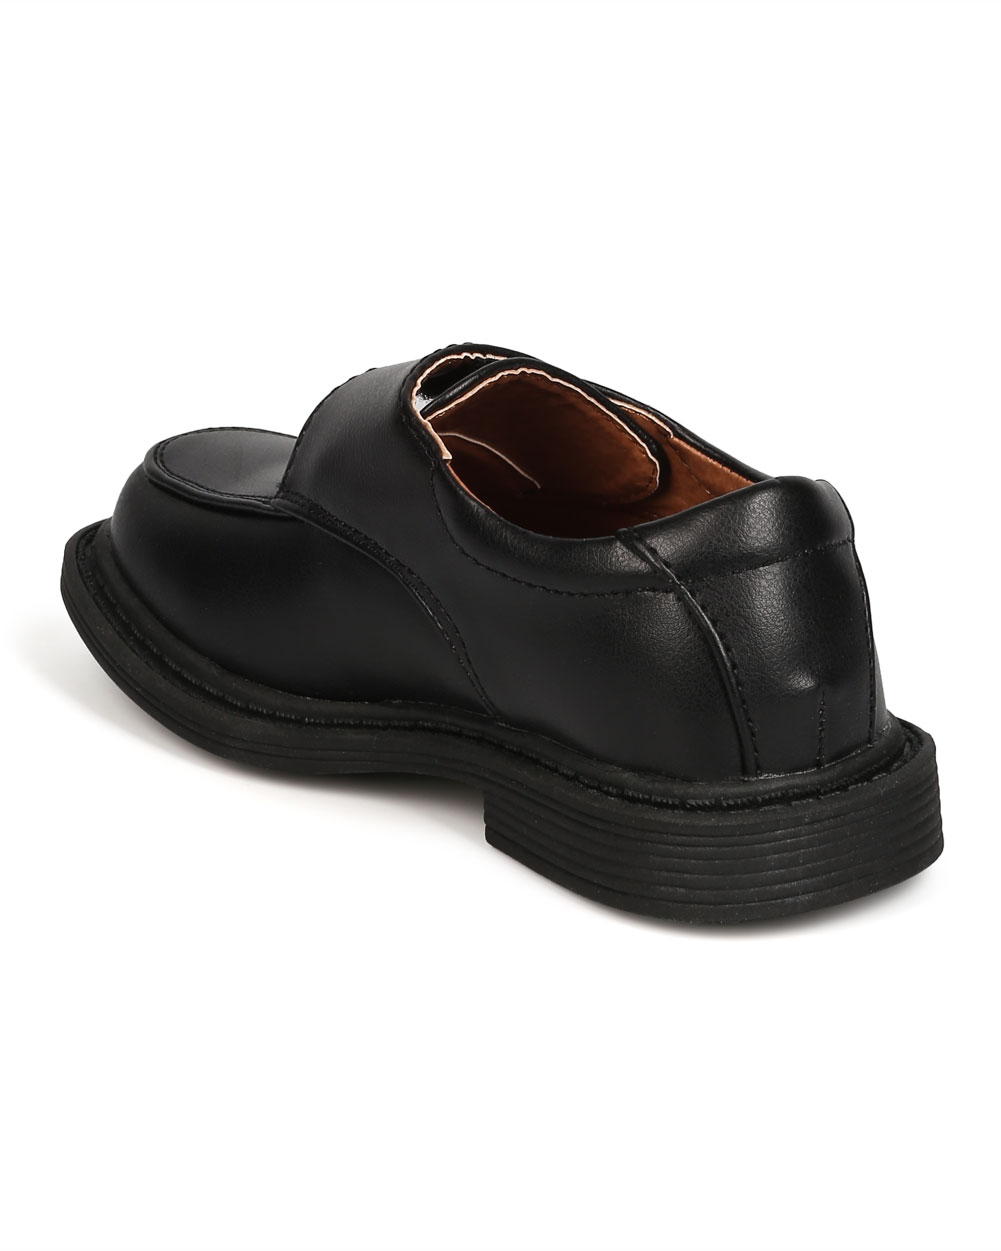 New Boy School Rider Ricky-913F Leatherette Square Toe Banded Dress Shoe - image 3 of 5